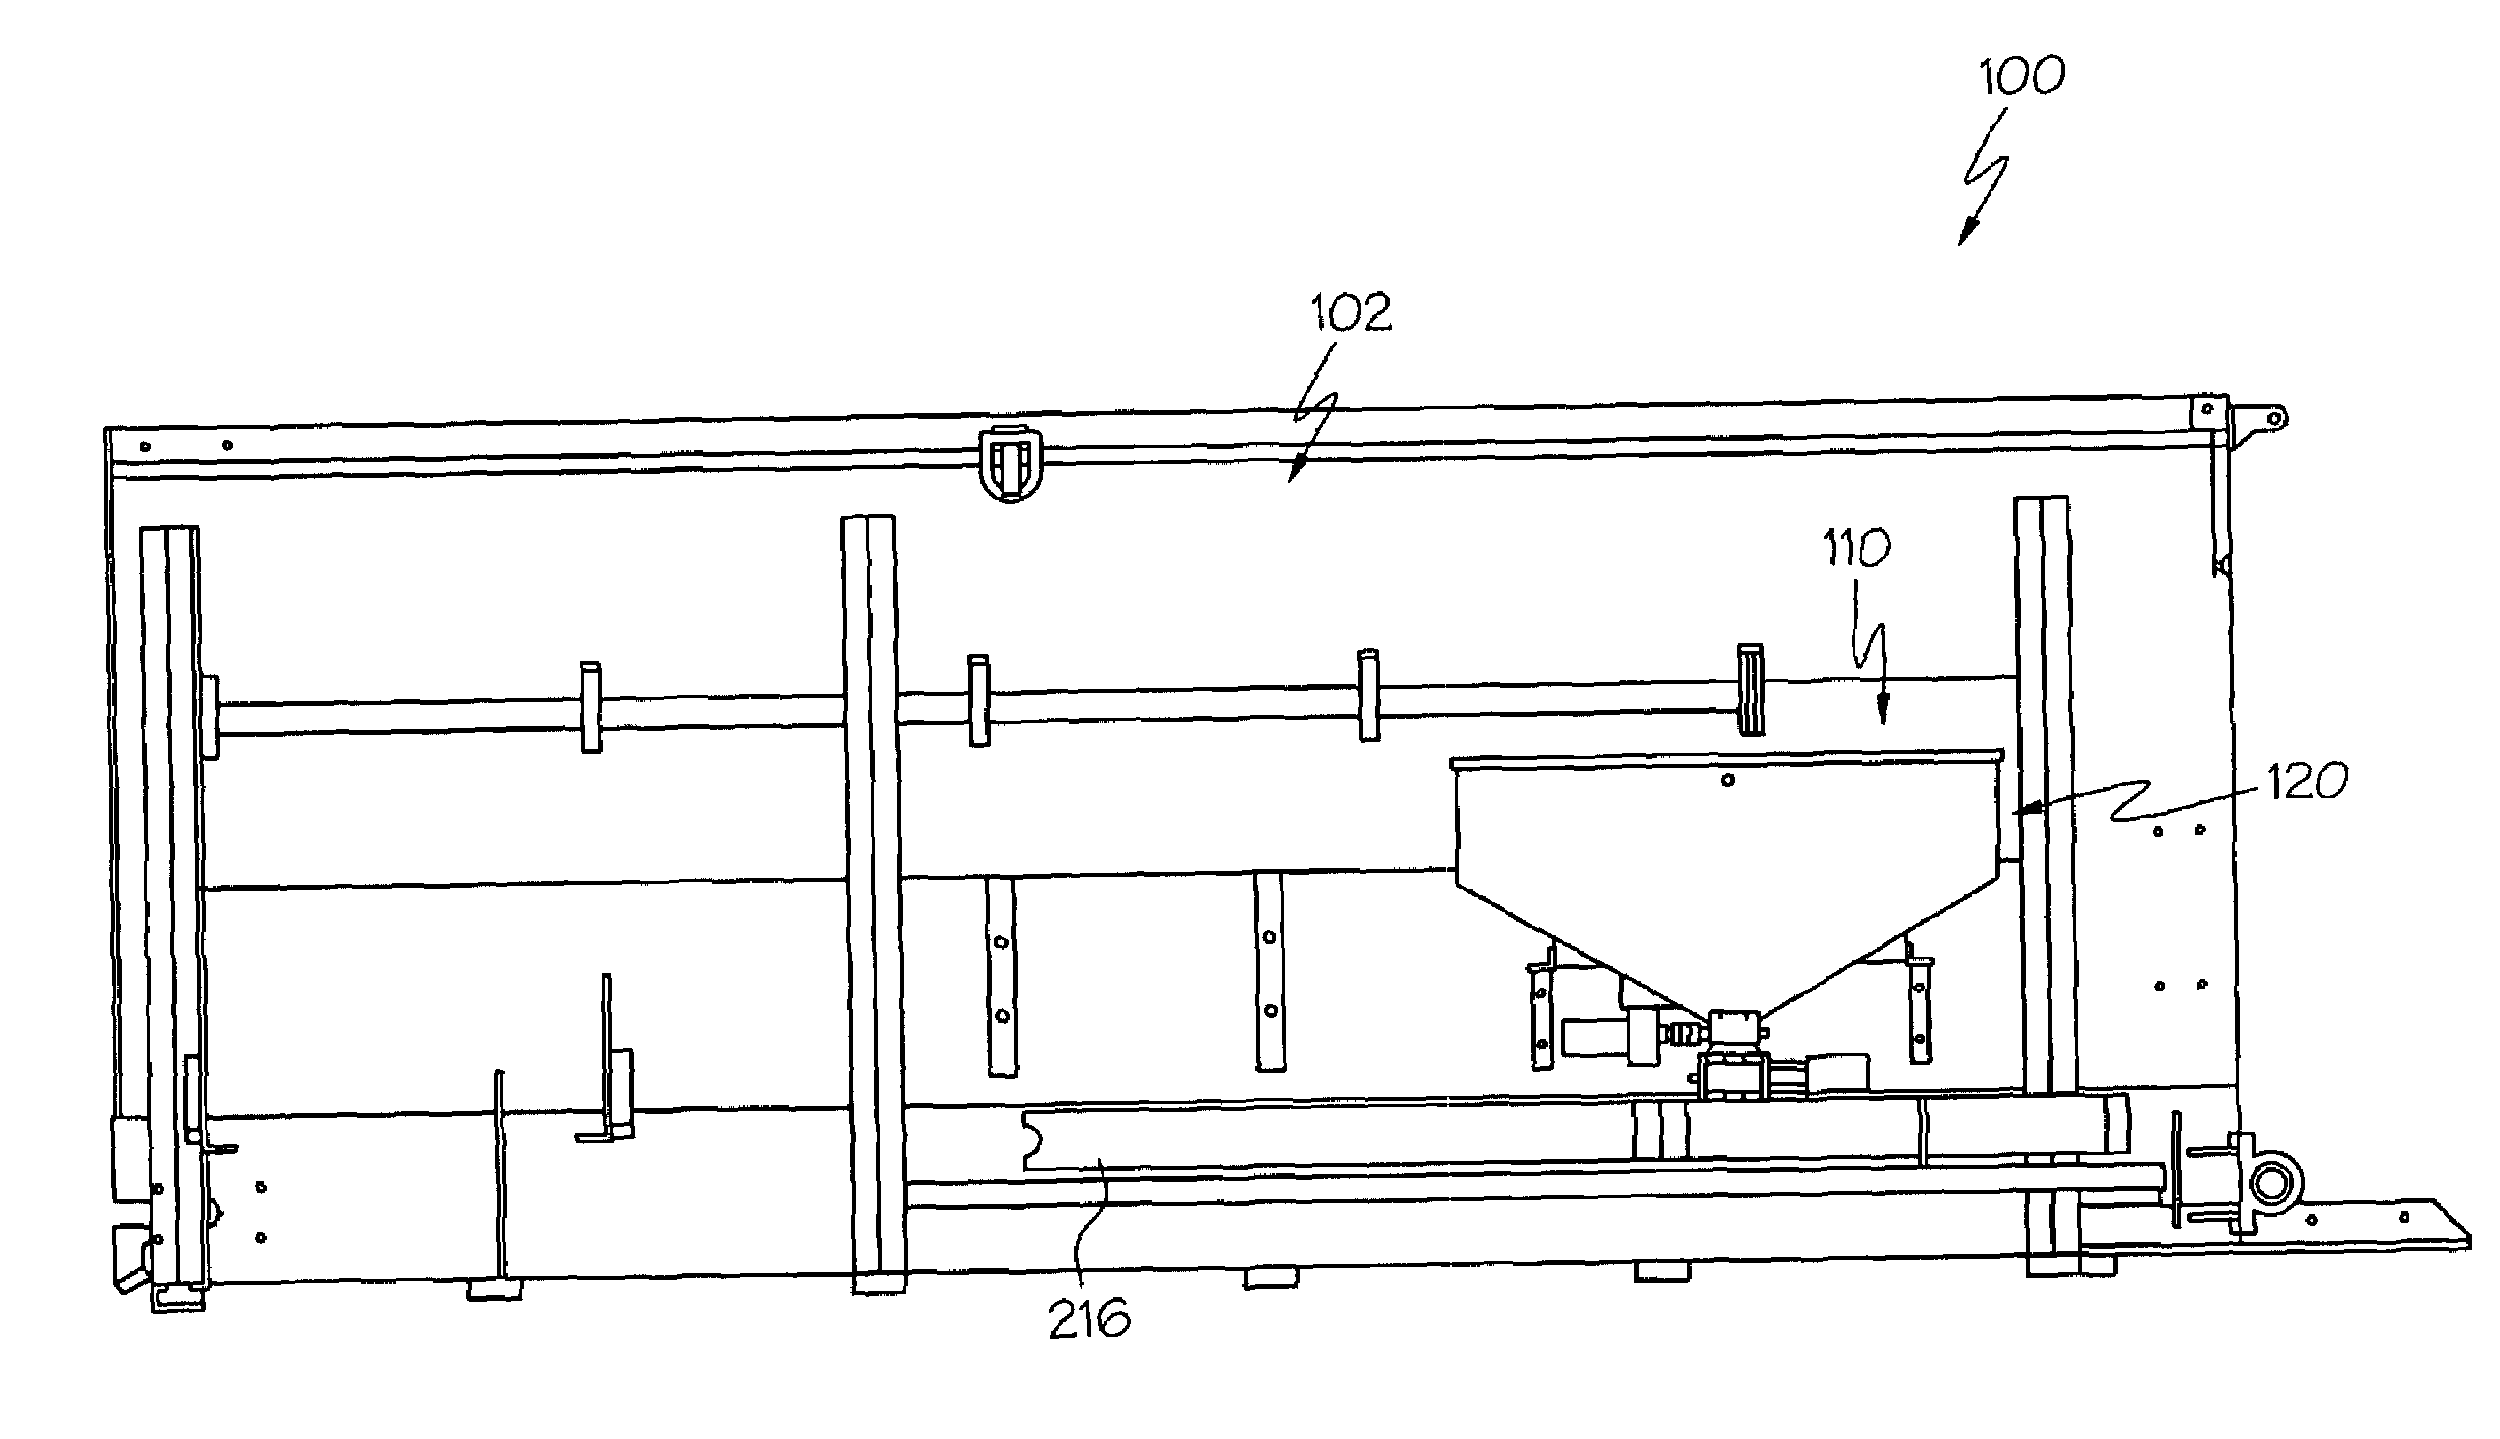 Bulk material discharge assembly with feeding apparatus